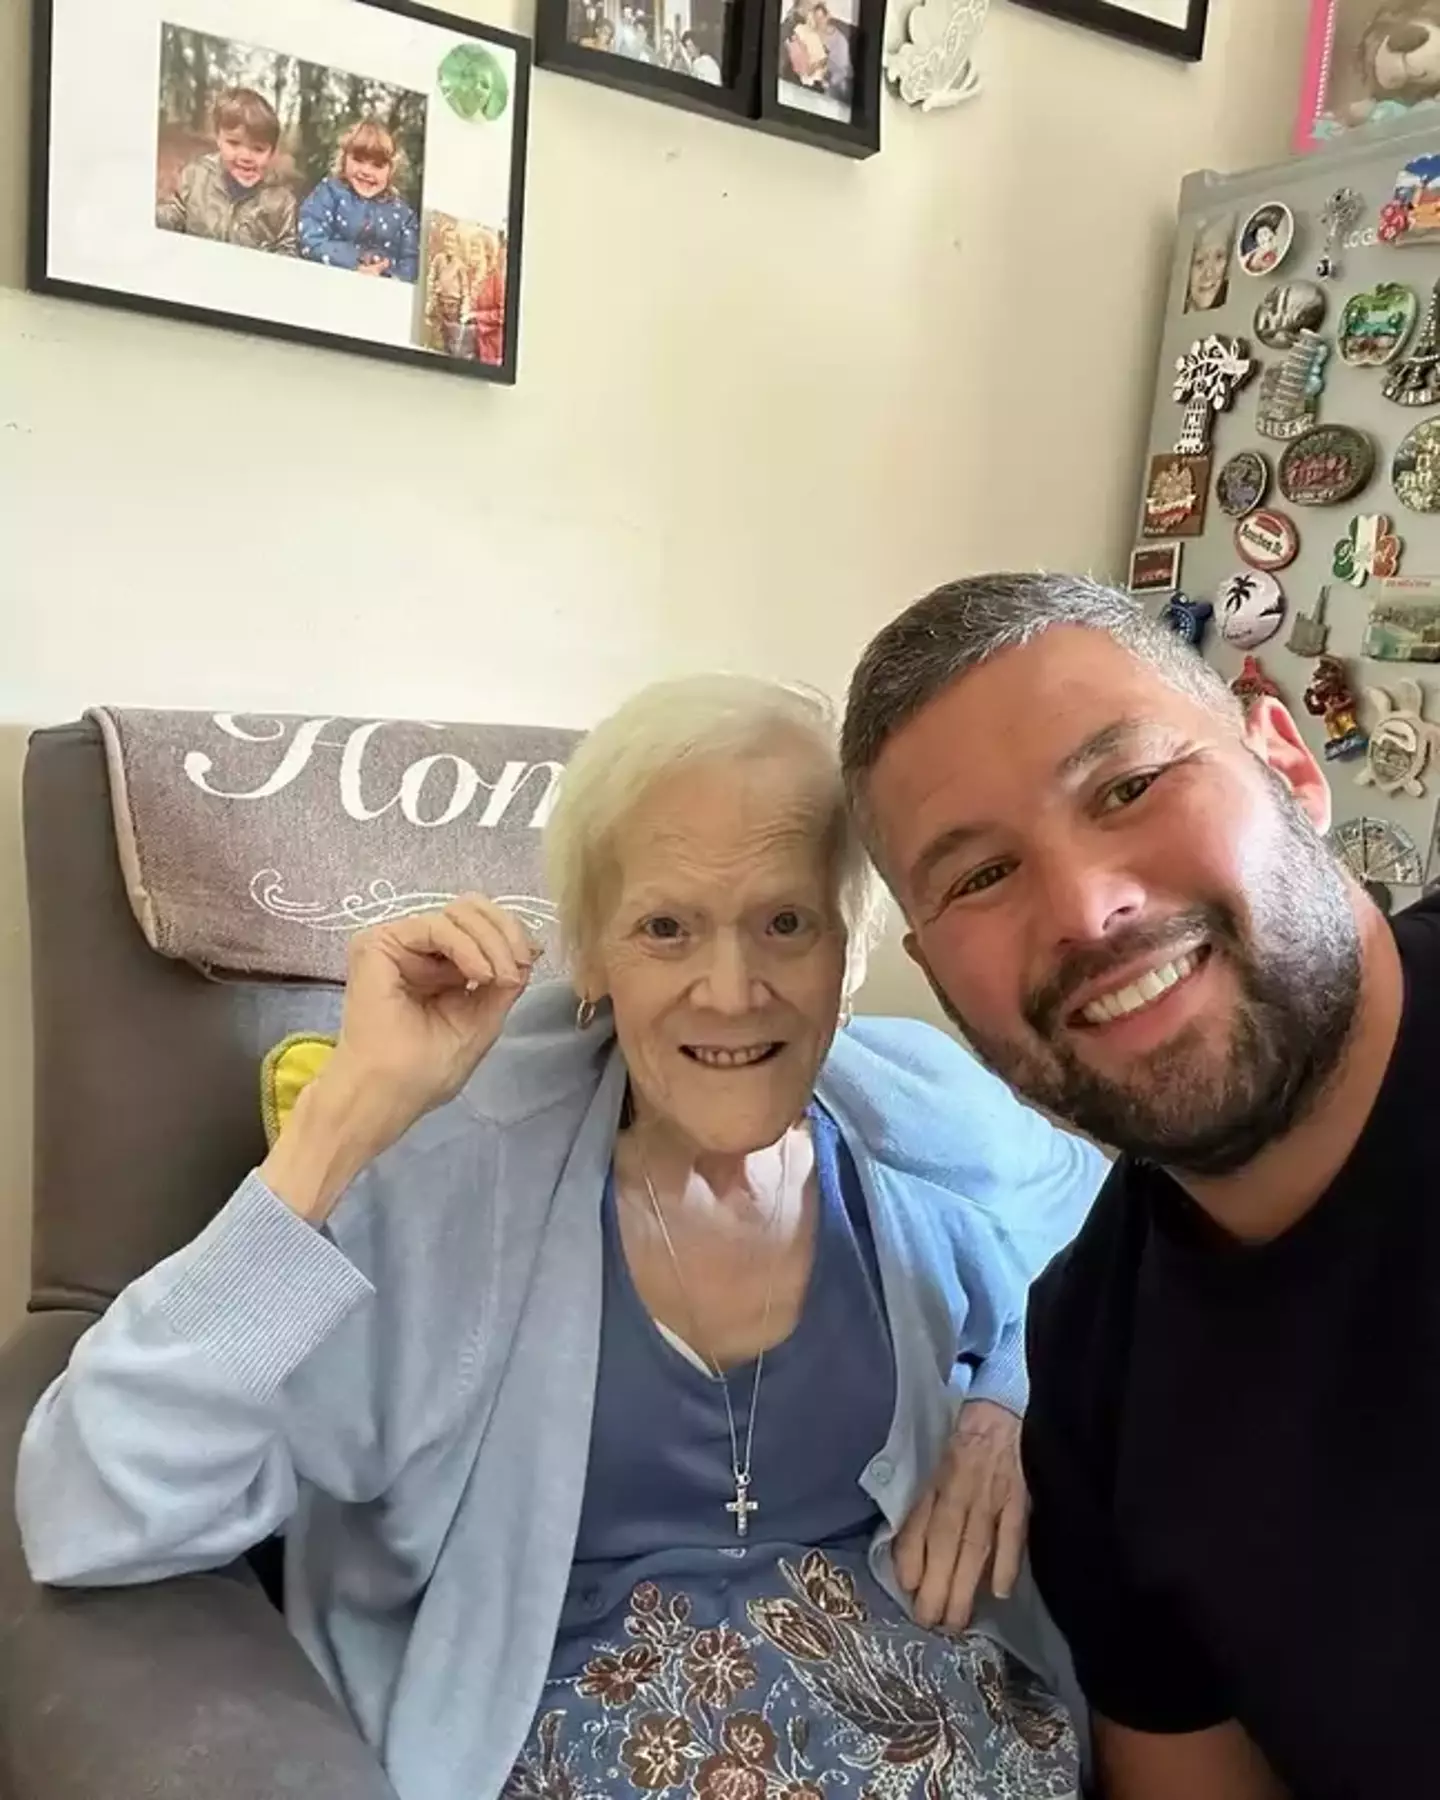 Bellew's grandmother Rose, who acted like a 'second mum' to him, died aged 97.